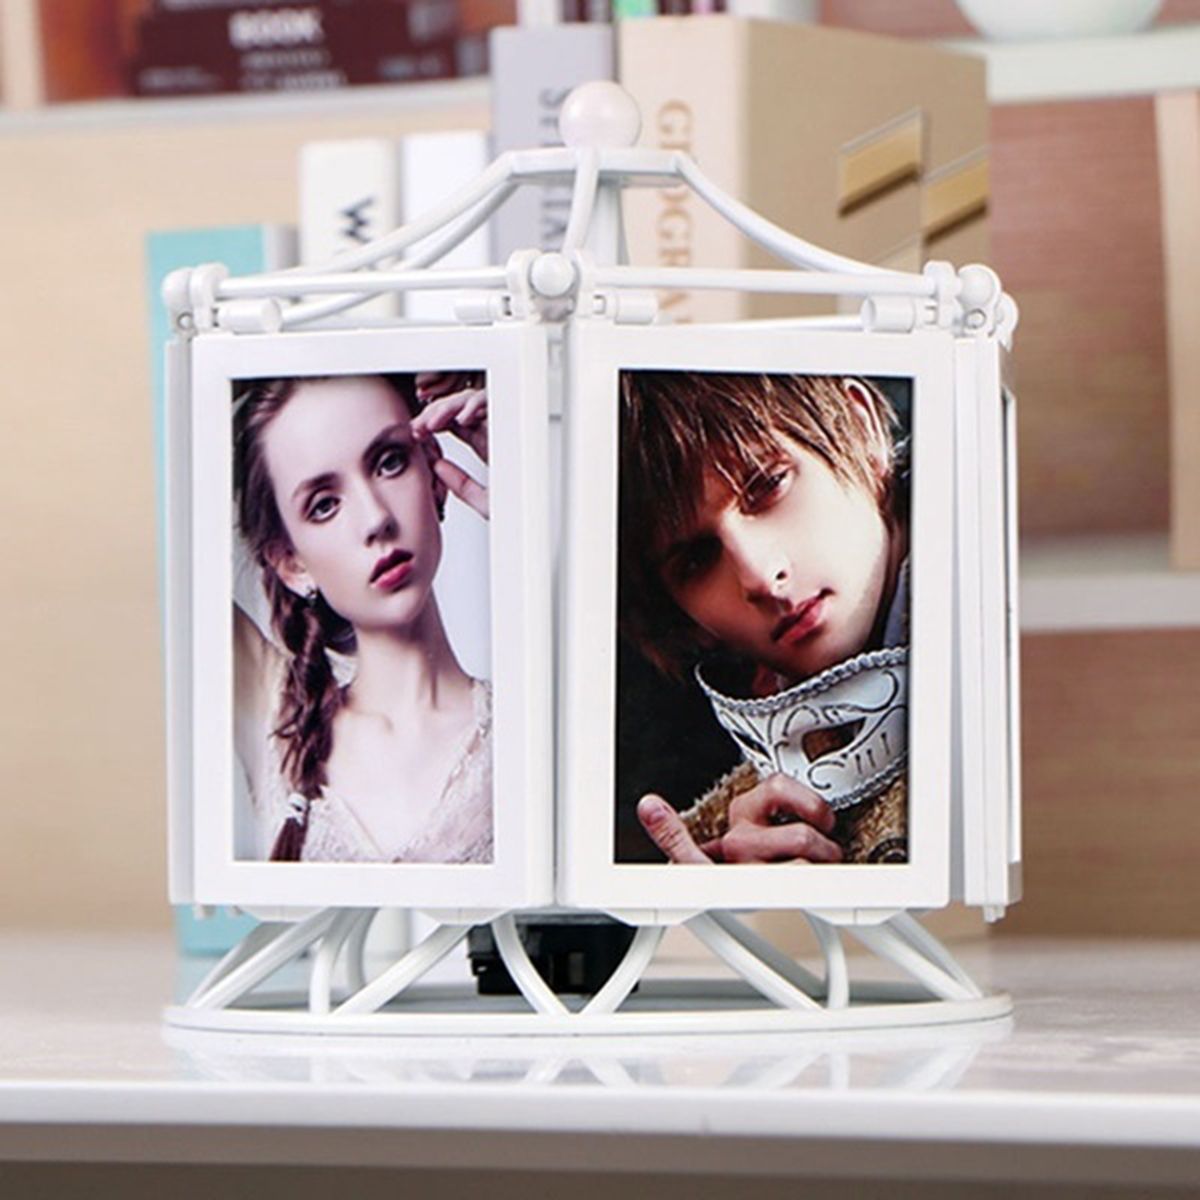 Rotating-Music-Box-Photo-Frame-Picture-Display-for-12-photos-Wedding-Graduation-1629784